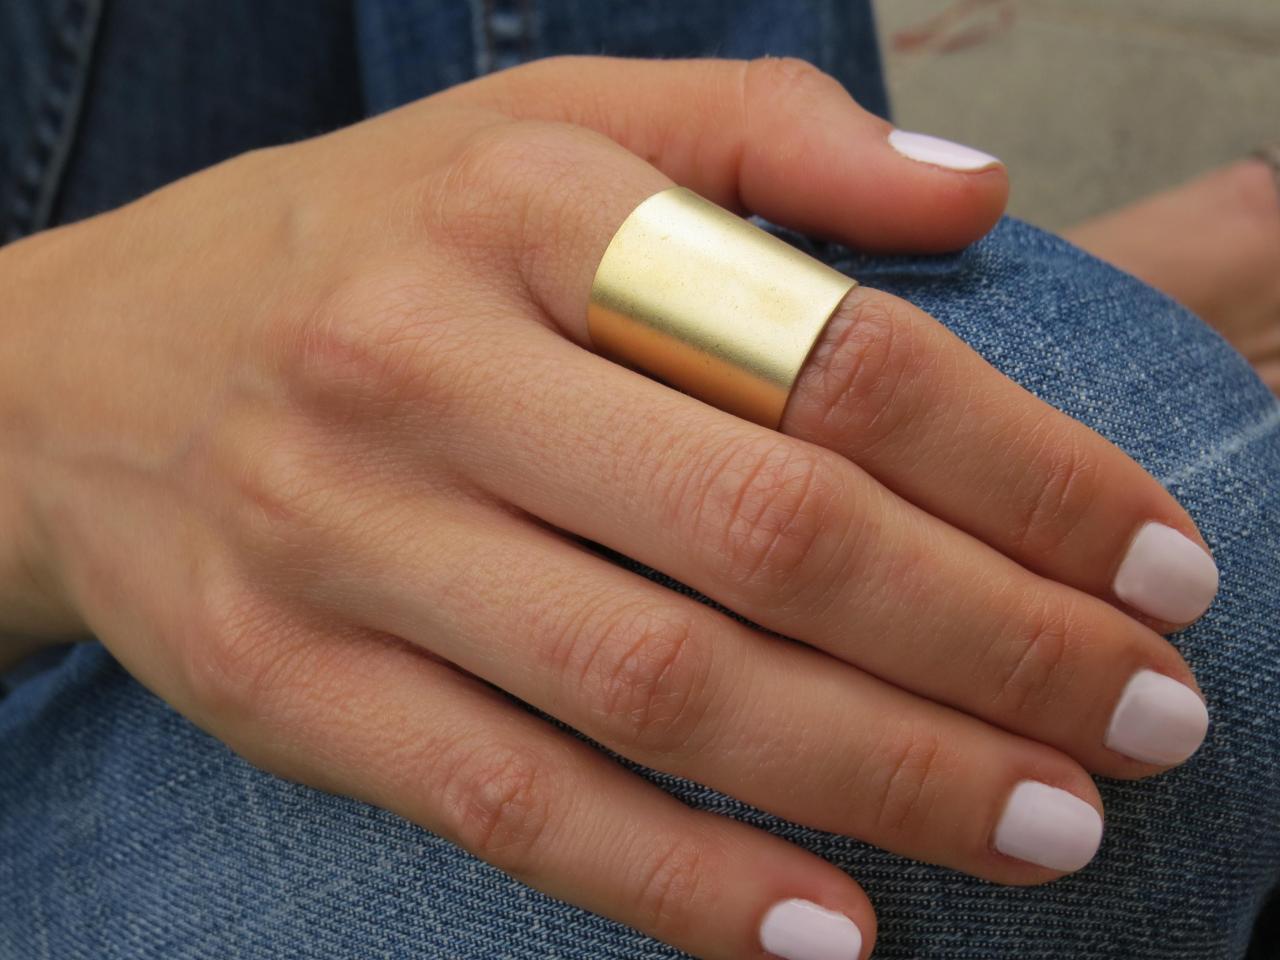 Gold ring - Wide band ring, Adjustable ring, Tube ring, Simple big ring, Statement ring, Gold accessories, Gold jewelry